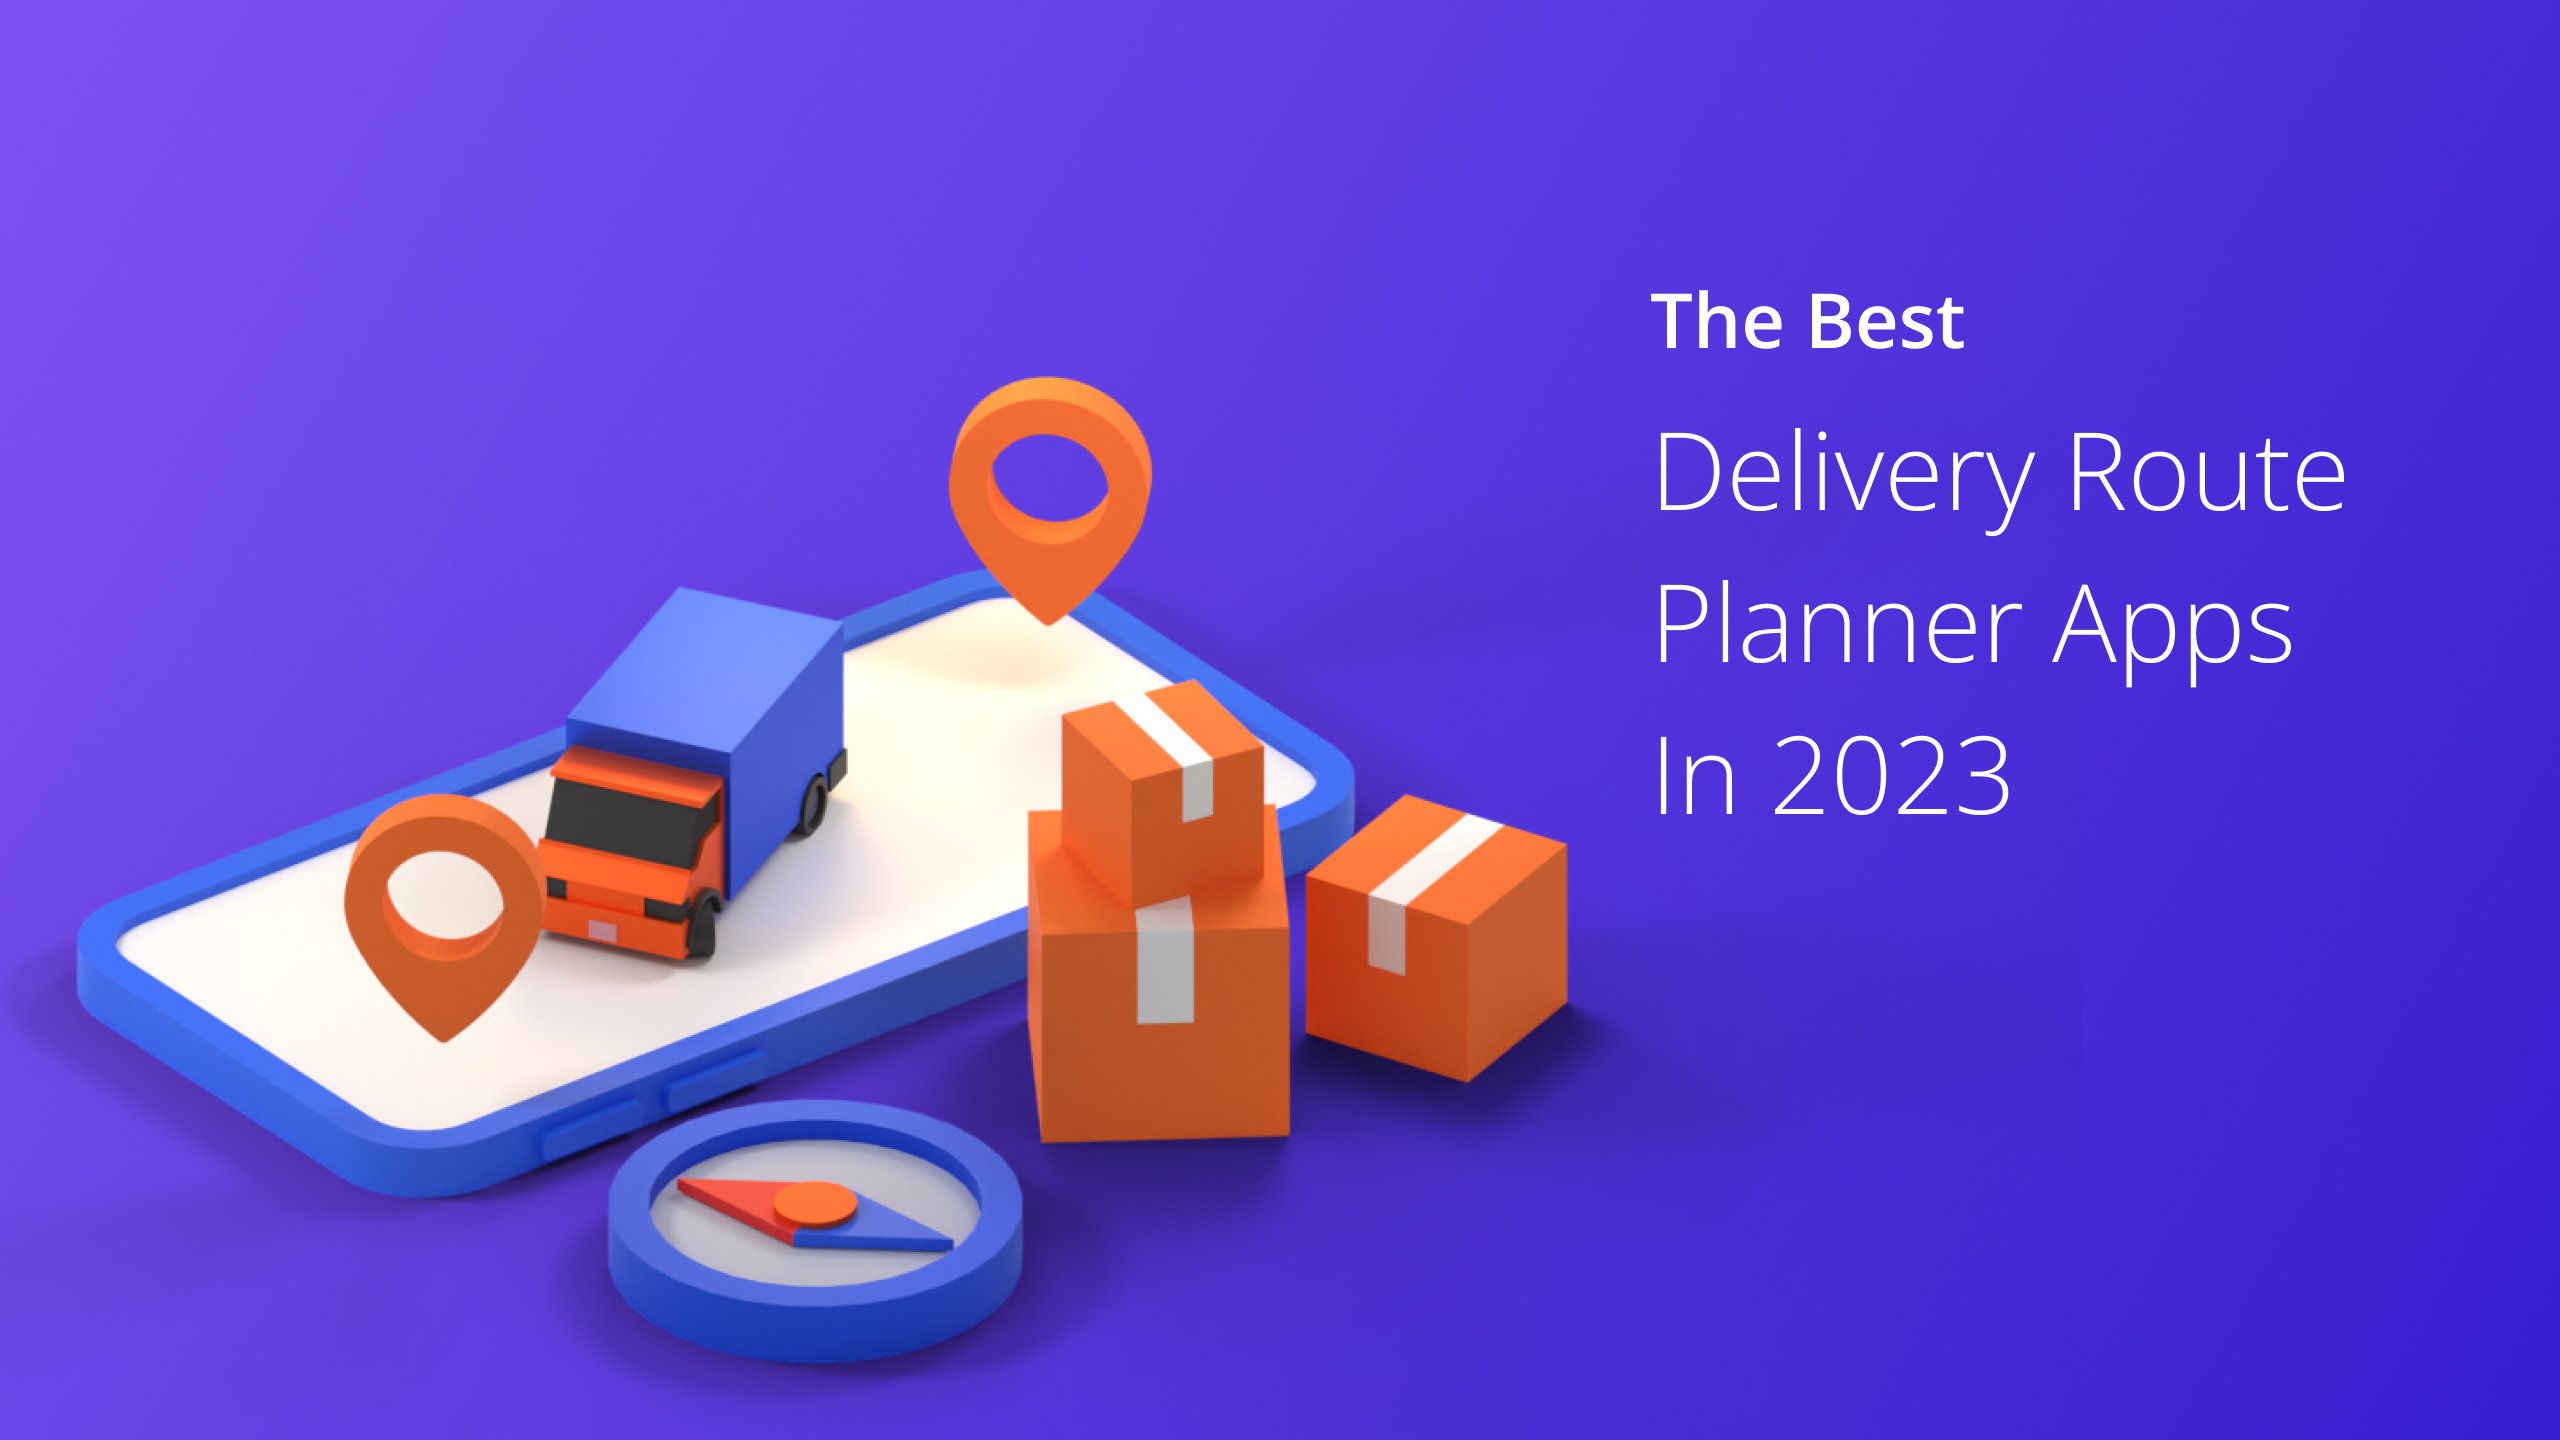 Custom Image - The Best Delivery Route Planner Apps in 2023